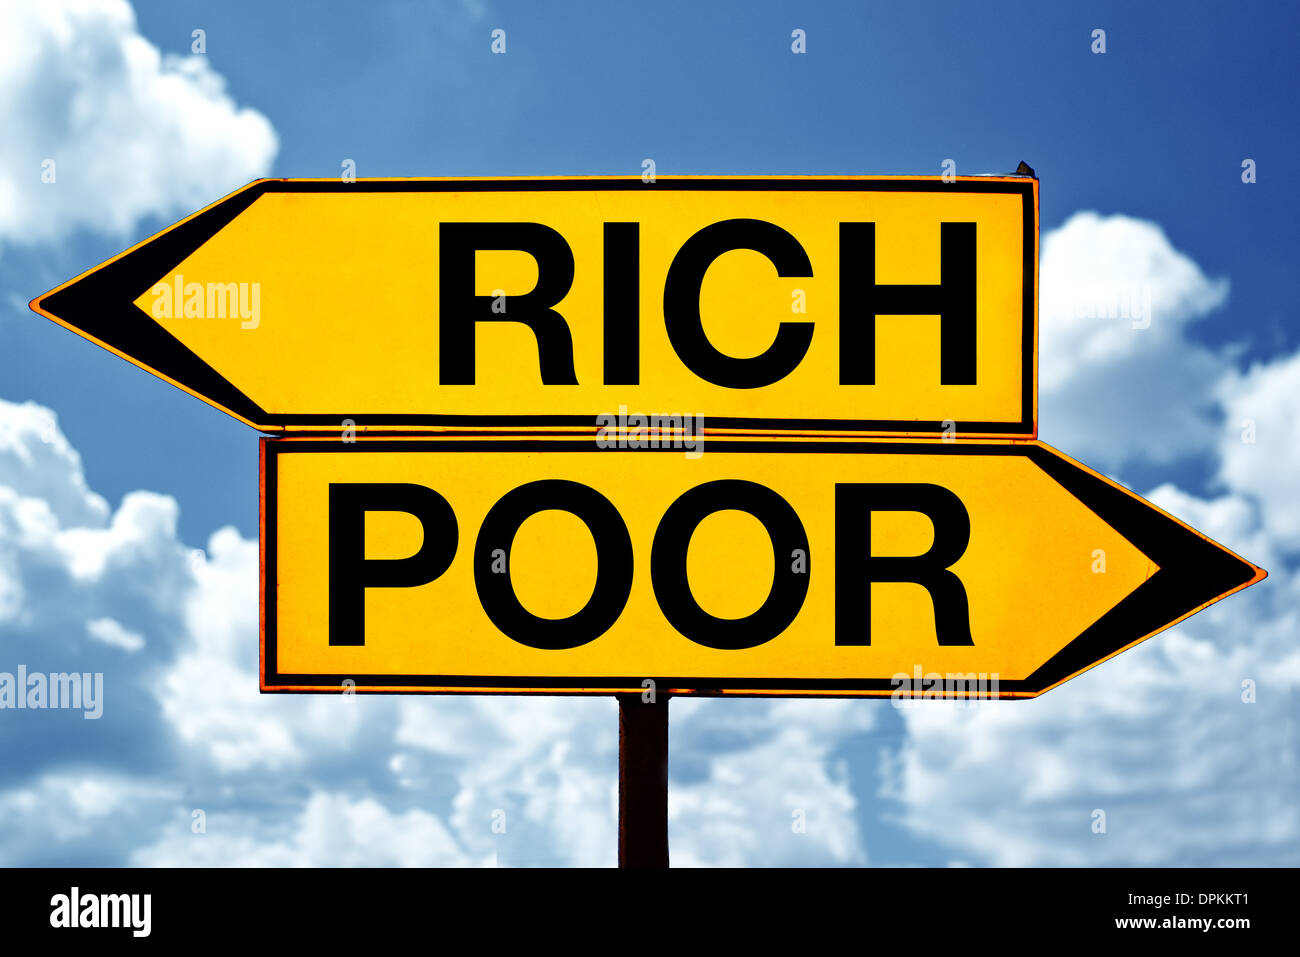 rich or poor, opposite signs. Two opposite signs against blue sky background. Stock Photo